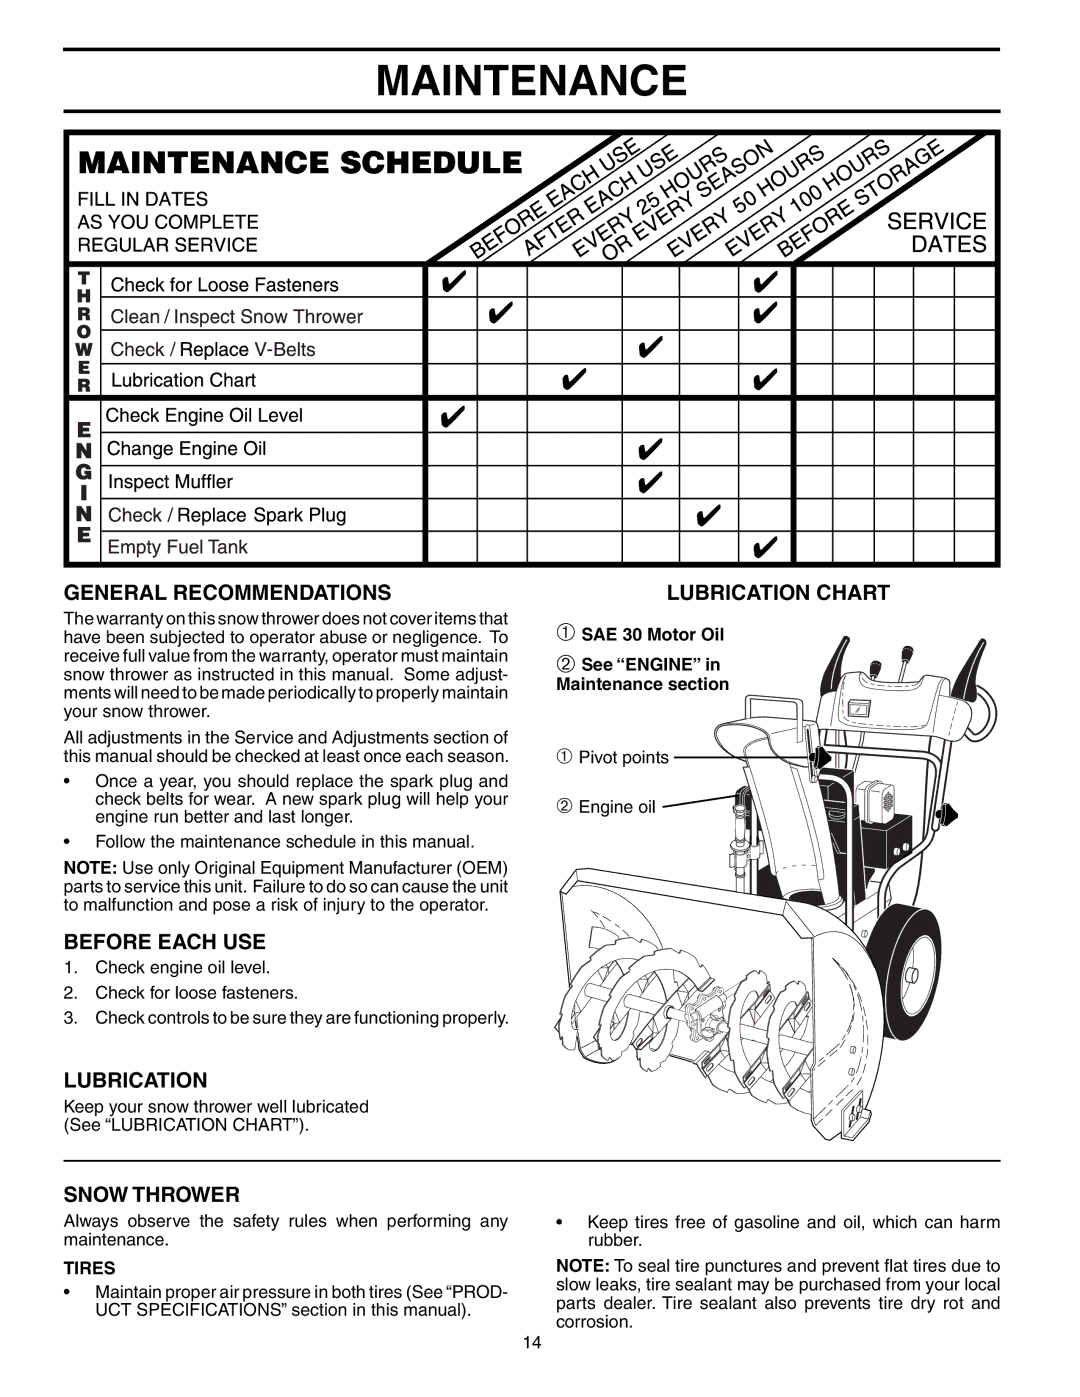 Poulan PR8527ESB owner manual Maintenance, General Recommendations, Before Each USE, Lubrication, Snow Thrower 